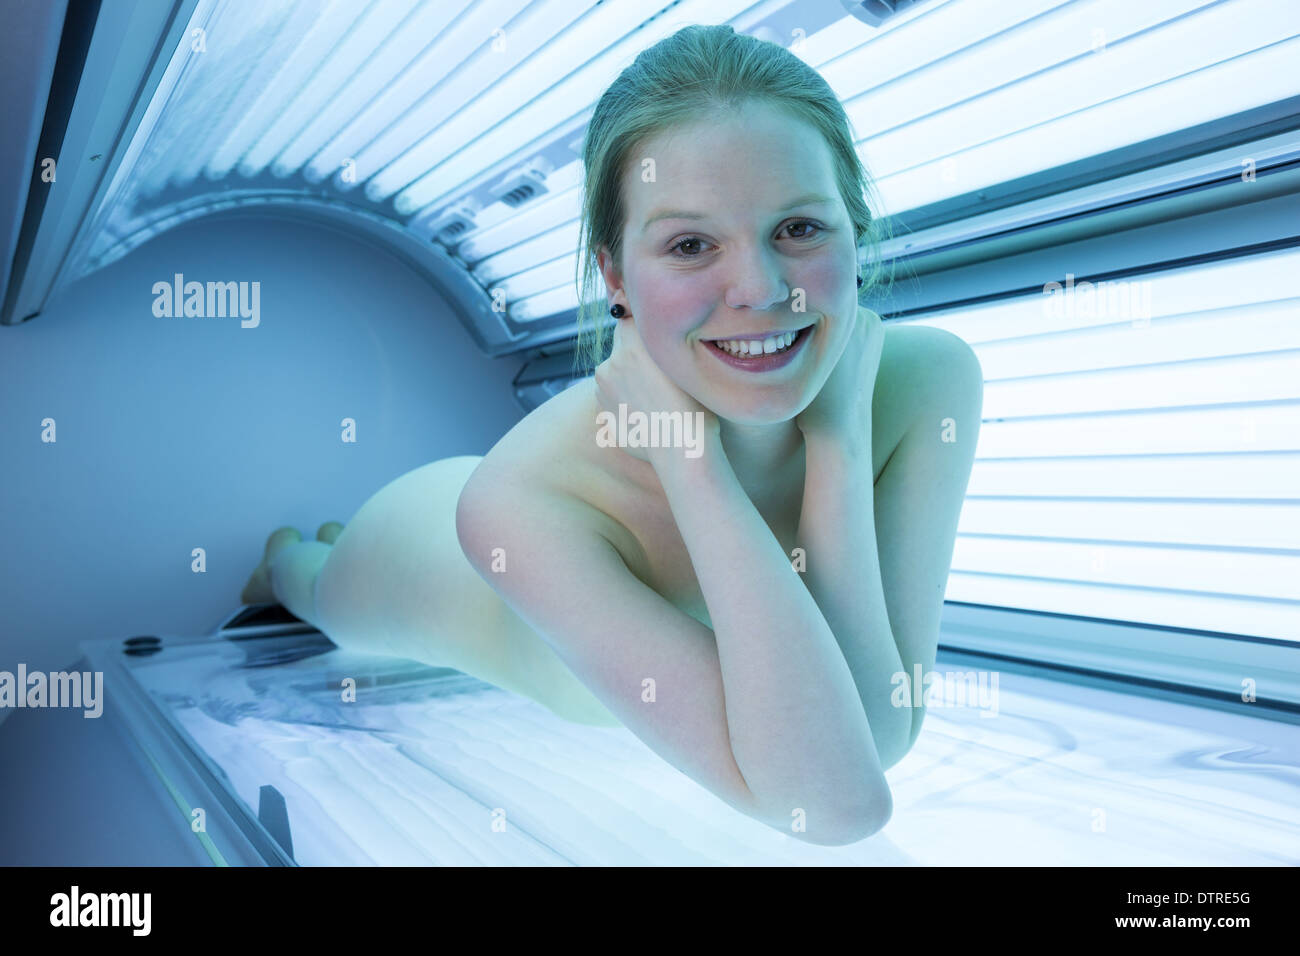 Tanning booth nude